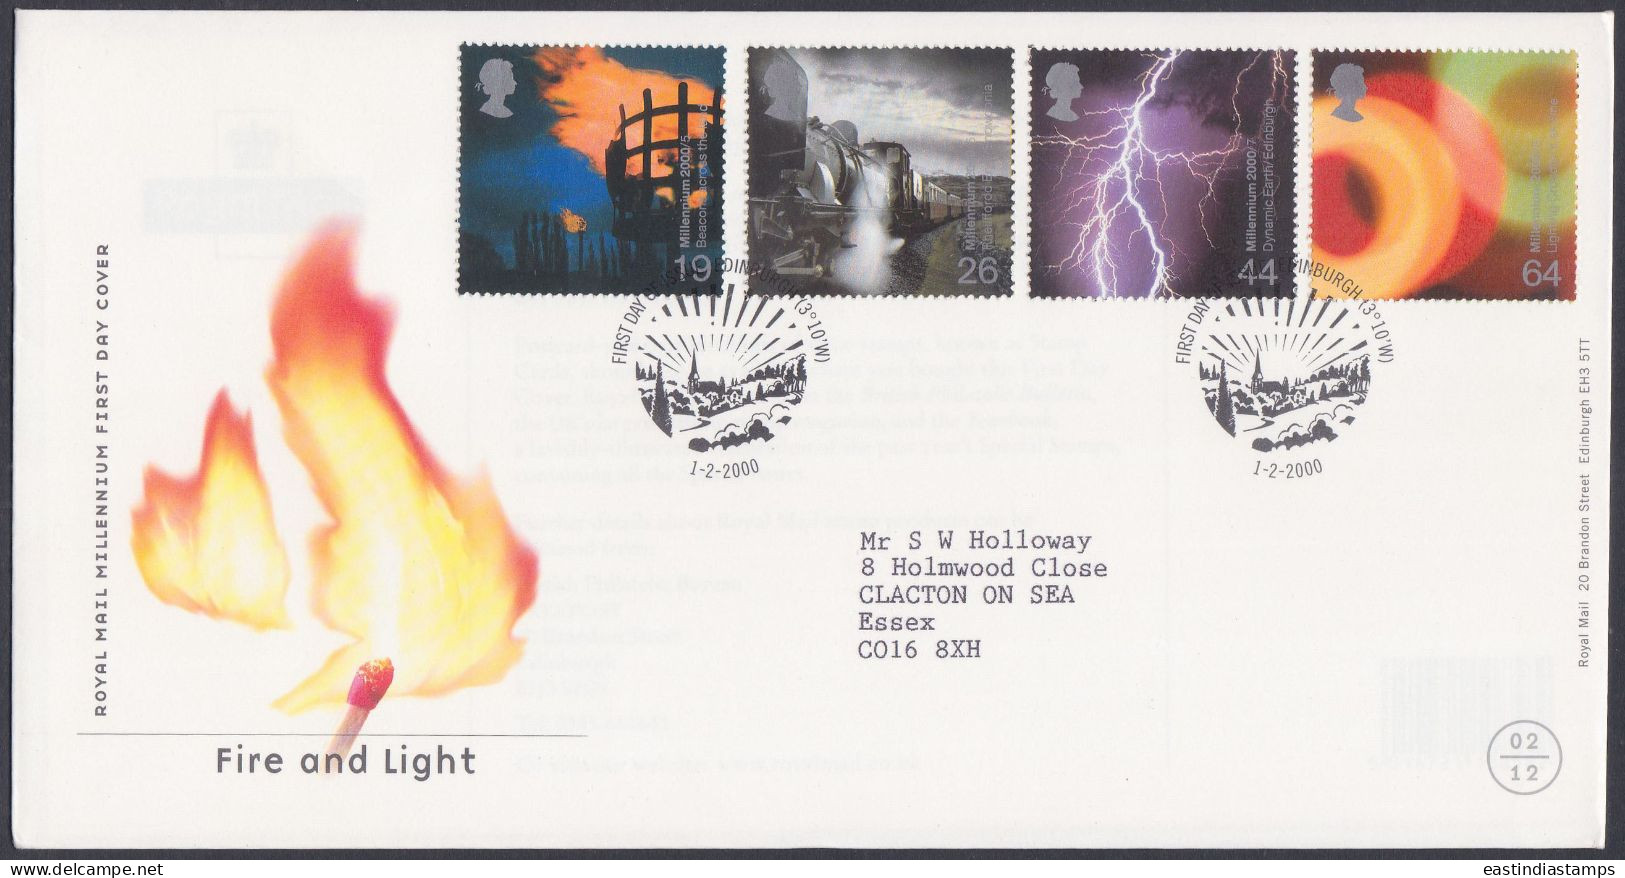 GB Great Britain 2000 FDC Fire And Light, Lightning, Train, Rail, Railway, Trains, Pictorial Postmark, First Day Cover - Covers & Documents